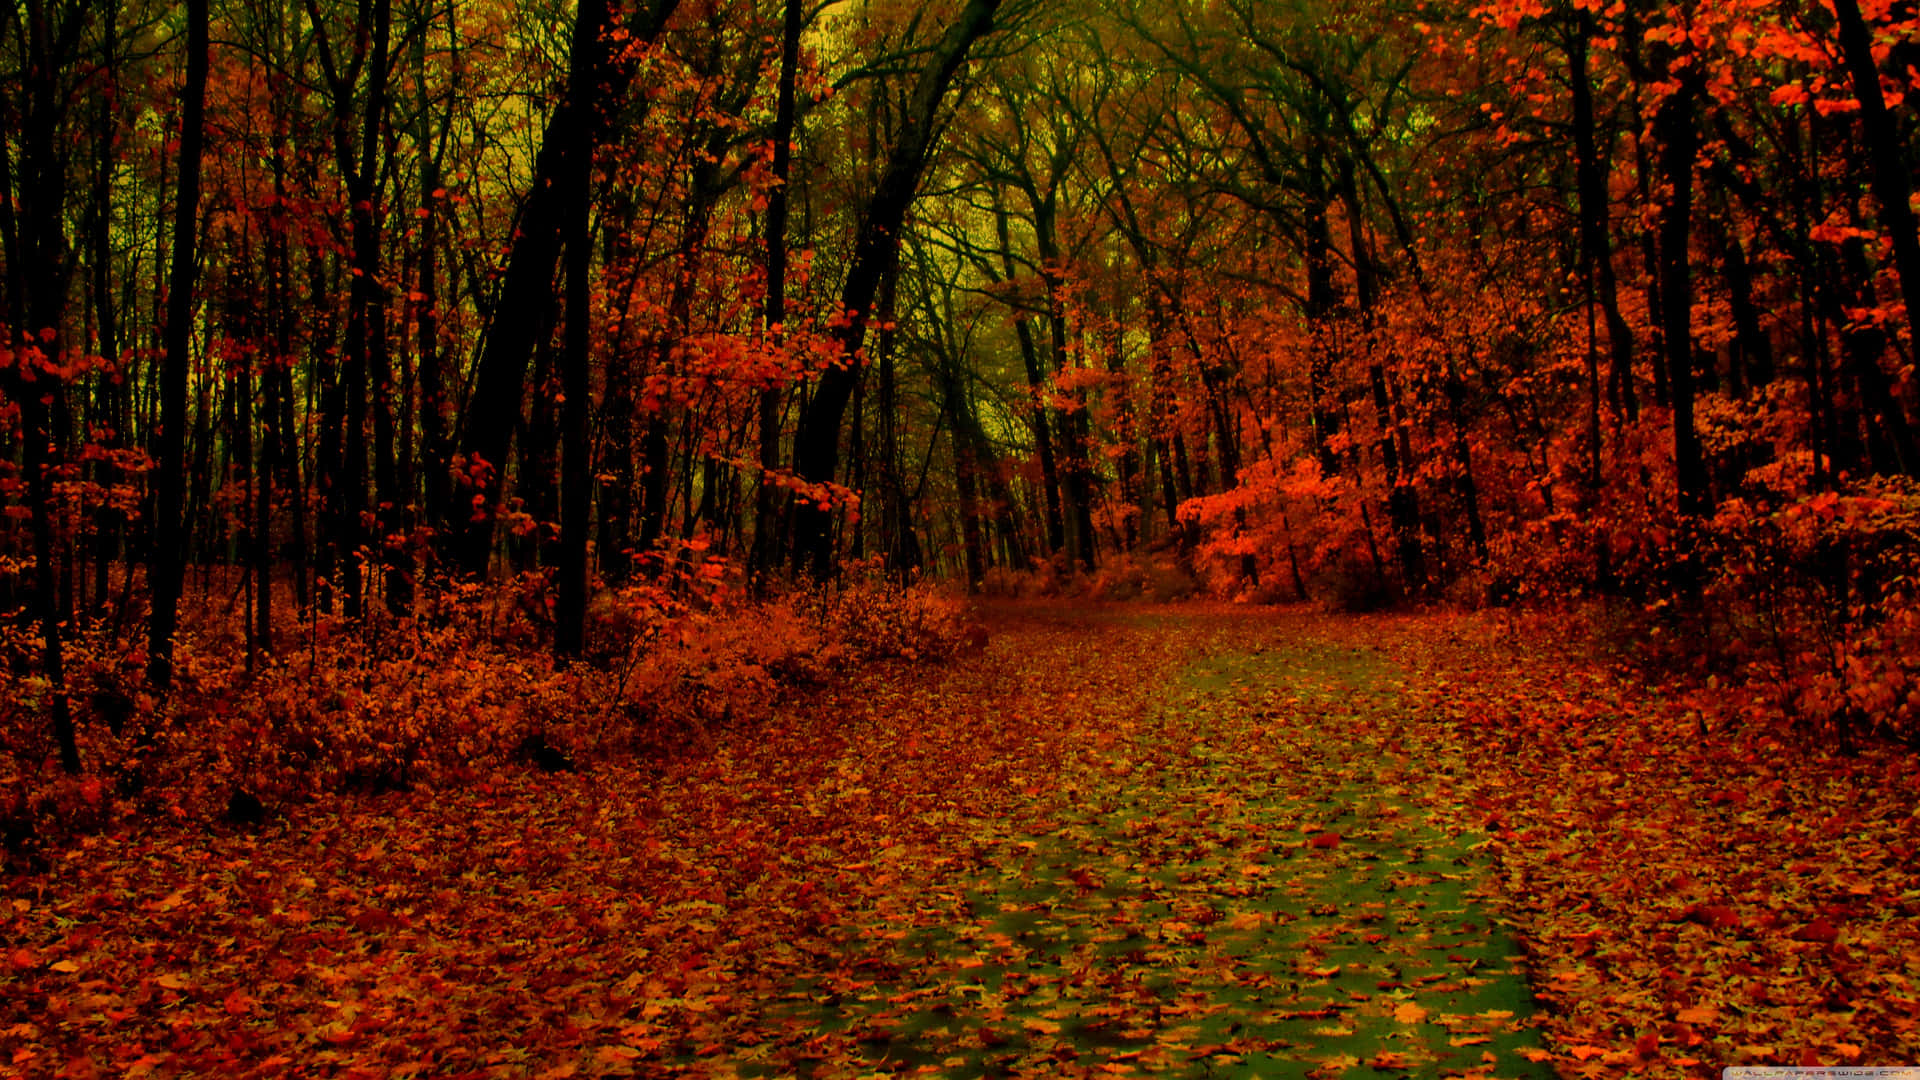 A beautiful red forest with vibrant colors. Wallpaper